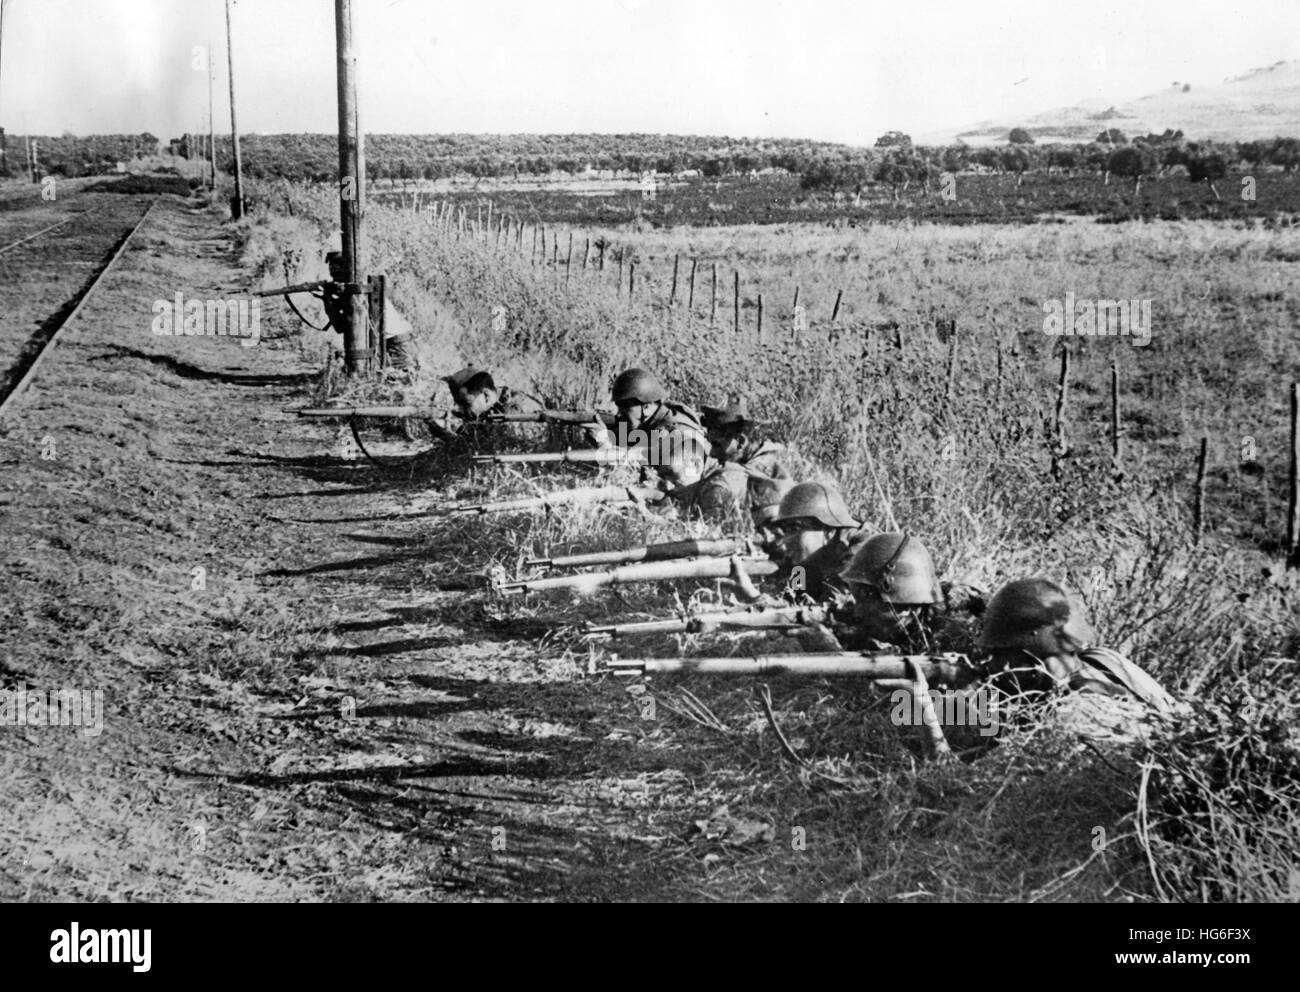 The Nazi propaganda picture shows troops of the Popular front defending a railroad against Francos troops near Córdoba, Spain, September 1936. Fotoarchiv für Zeitgeschichtee - NO WIRE SERVICE - | usage worldwide Stock Photo